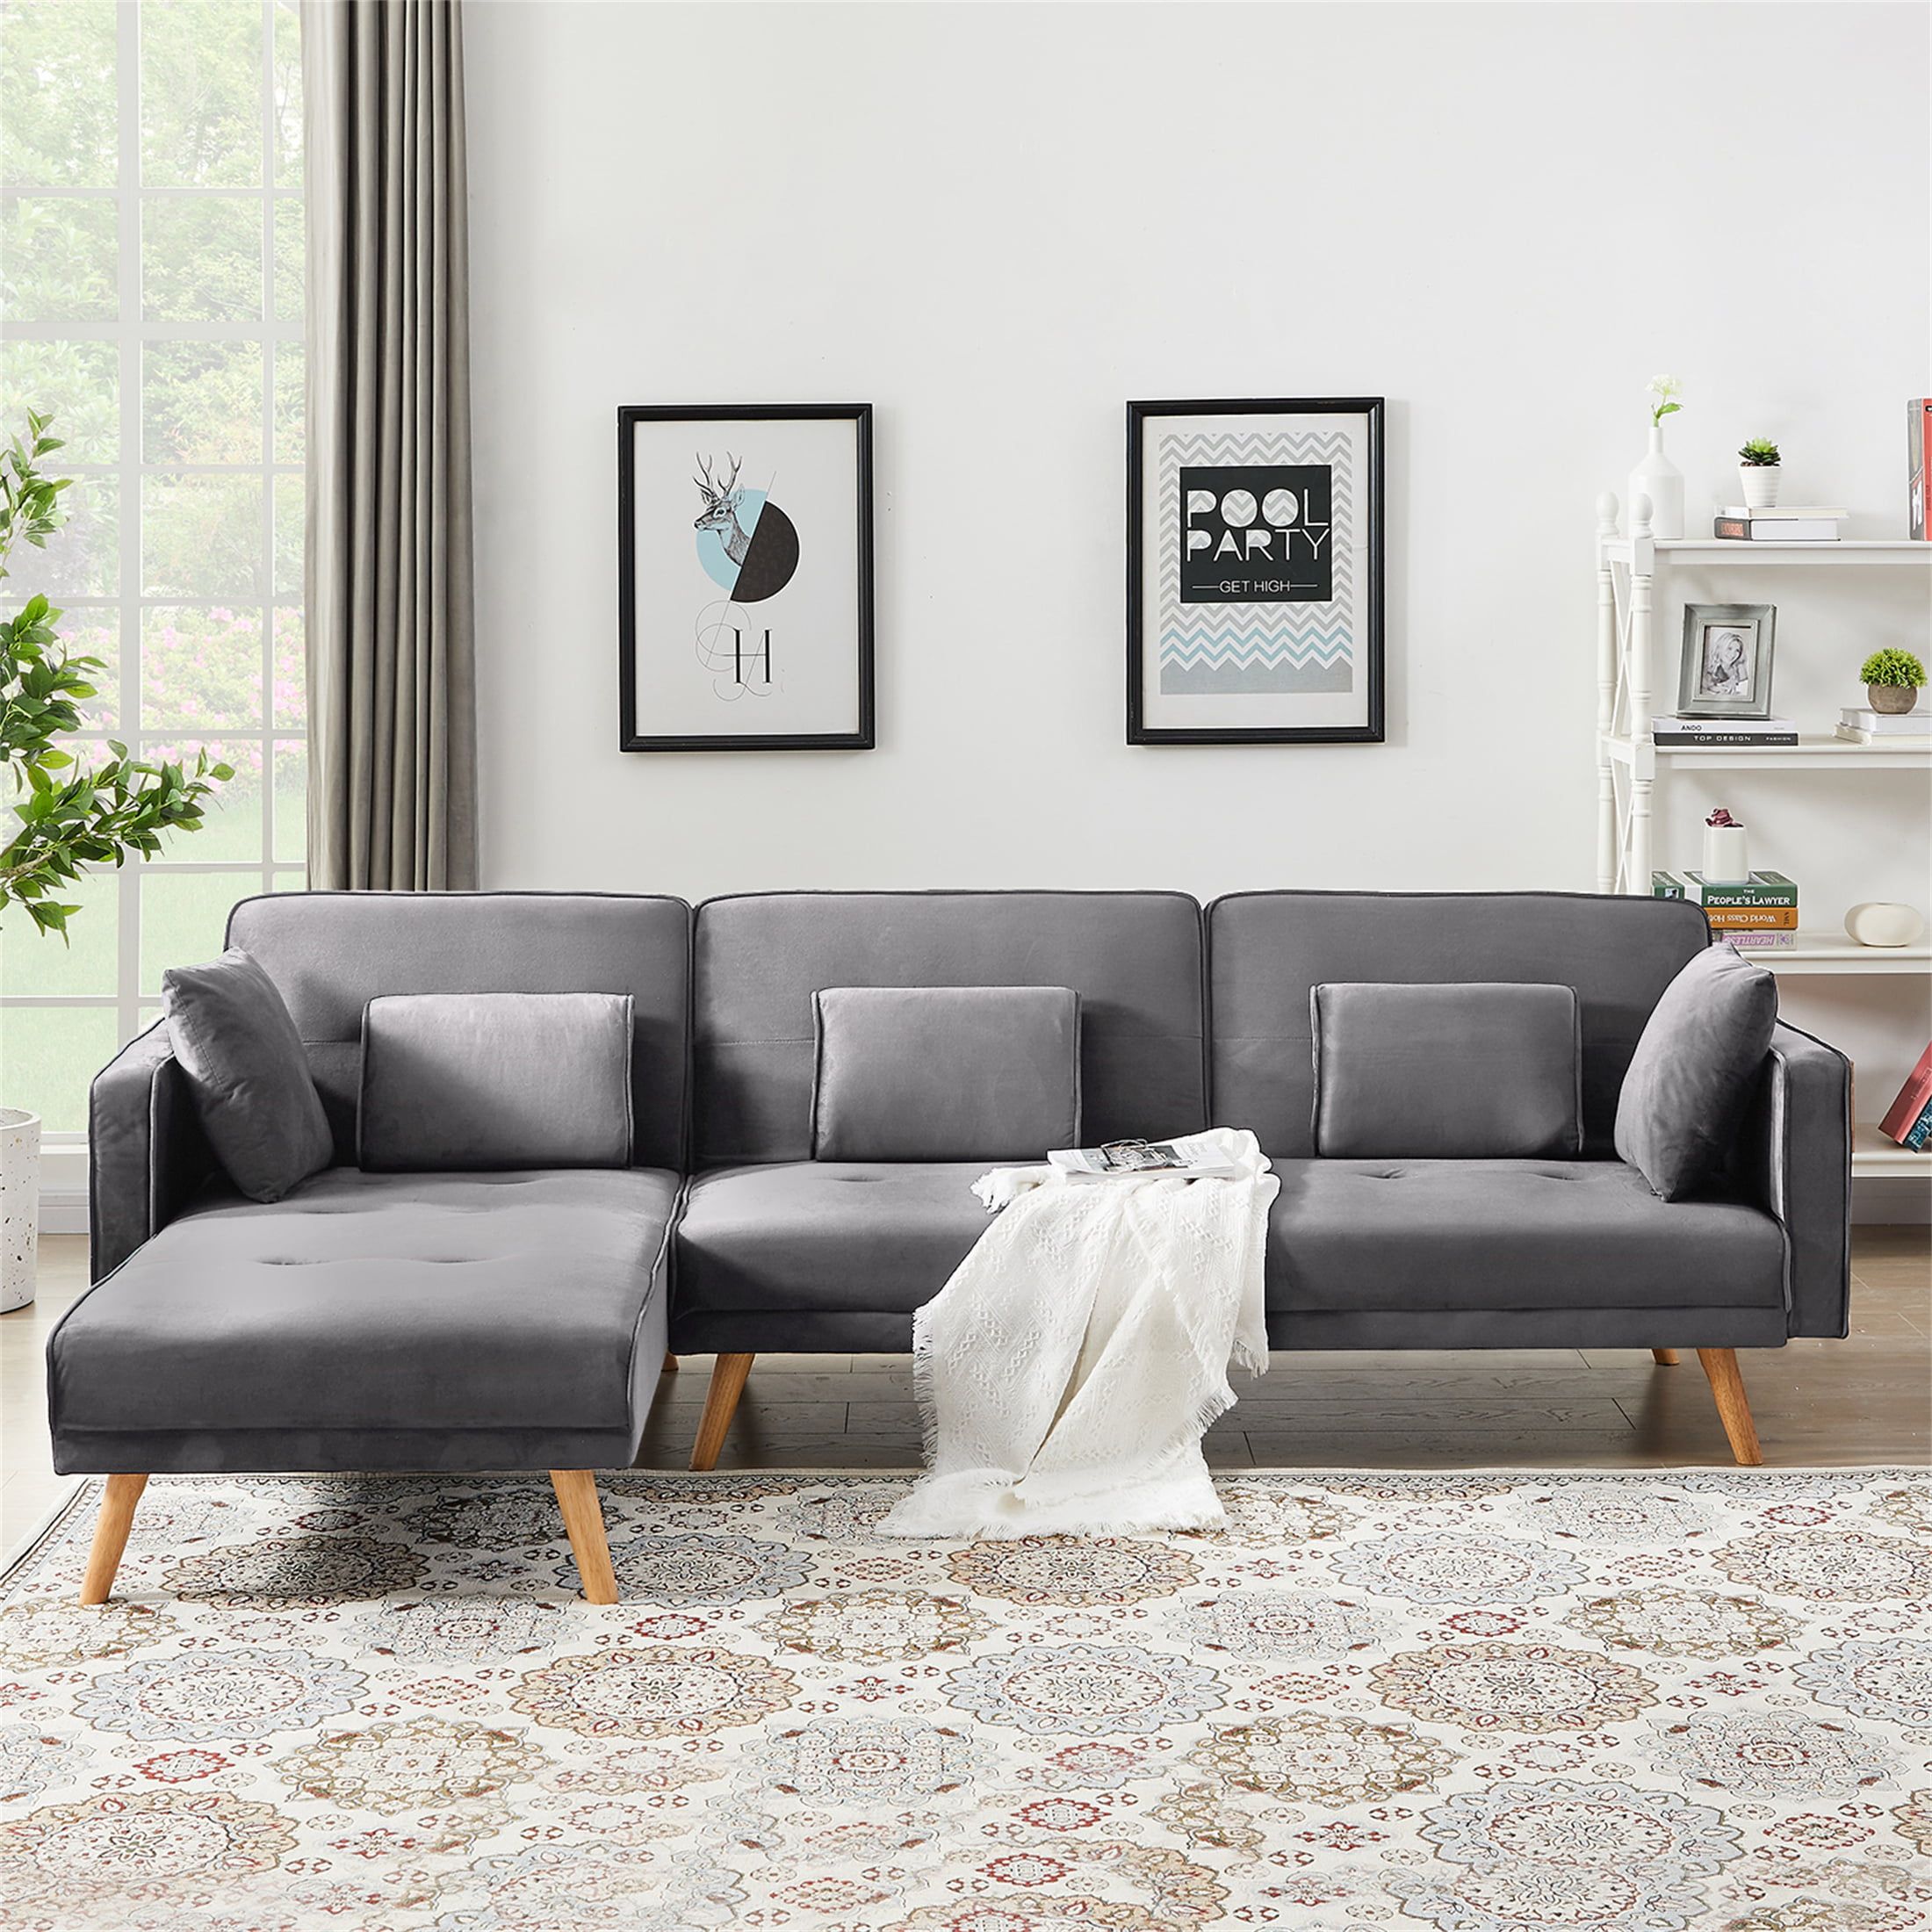 Aukfa 104" Velvet Sectional Sleeper Sofa  Living Room Convertible Couch   Left Hand Facing Chaise  Gray – Walmart Inside Left Or Right Facing Sleeper Sectionals (View 10 of 15)